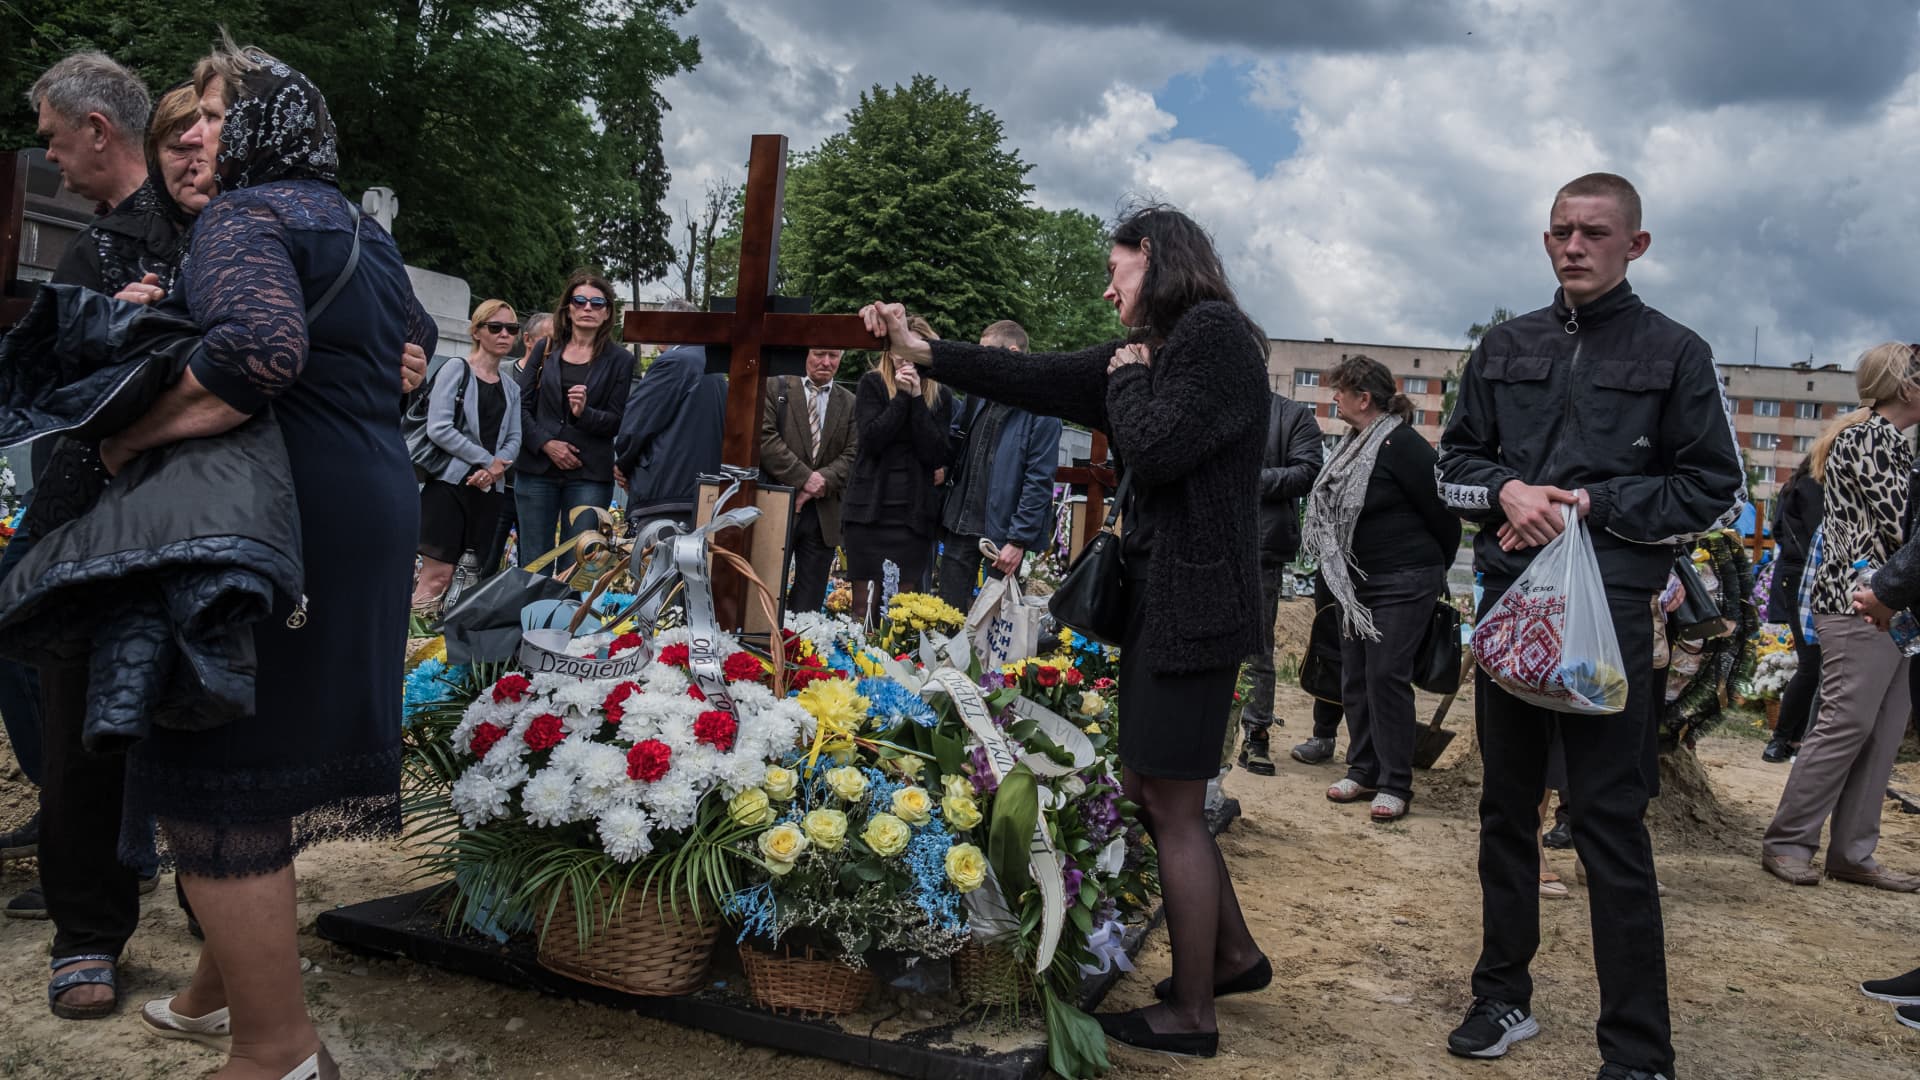 Relatives of the fallen soldiers pay their final respects by the graves at the cemetery after the funeral of the fallen soldiers in Lviv, Ukraine on May 26, 2022. The number of soldiers who lost their lives is increasing day by day and different burial sites are opened to bury people, as in Lviv.